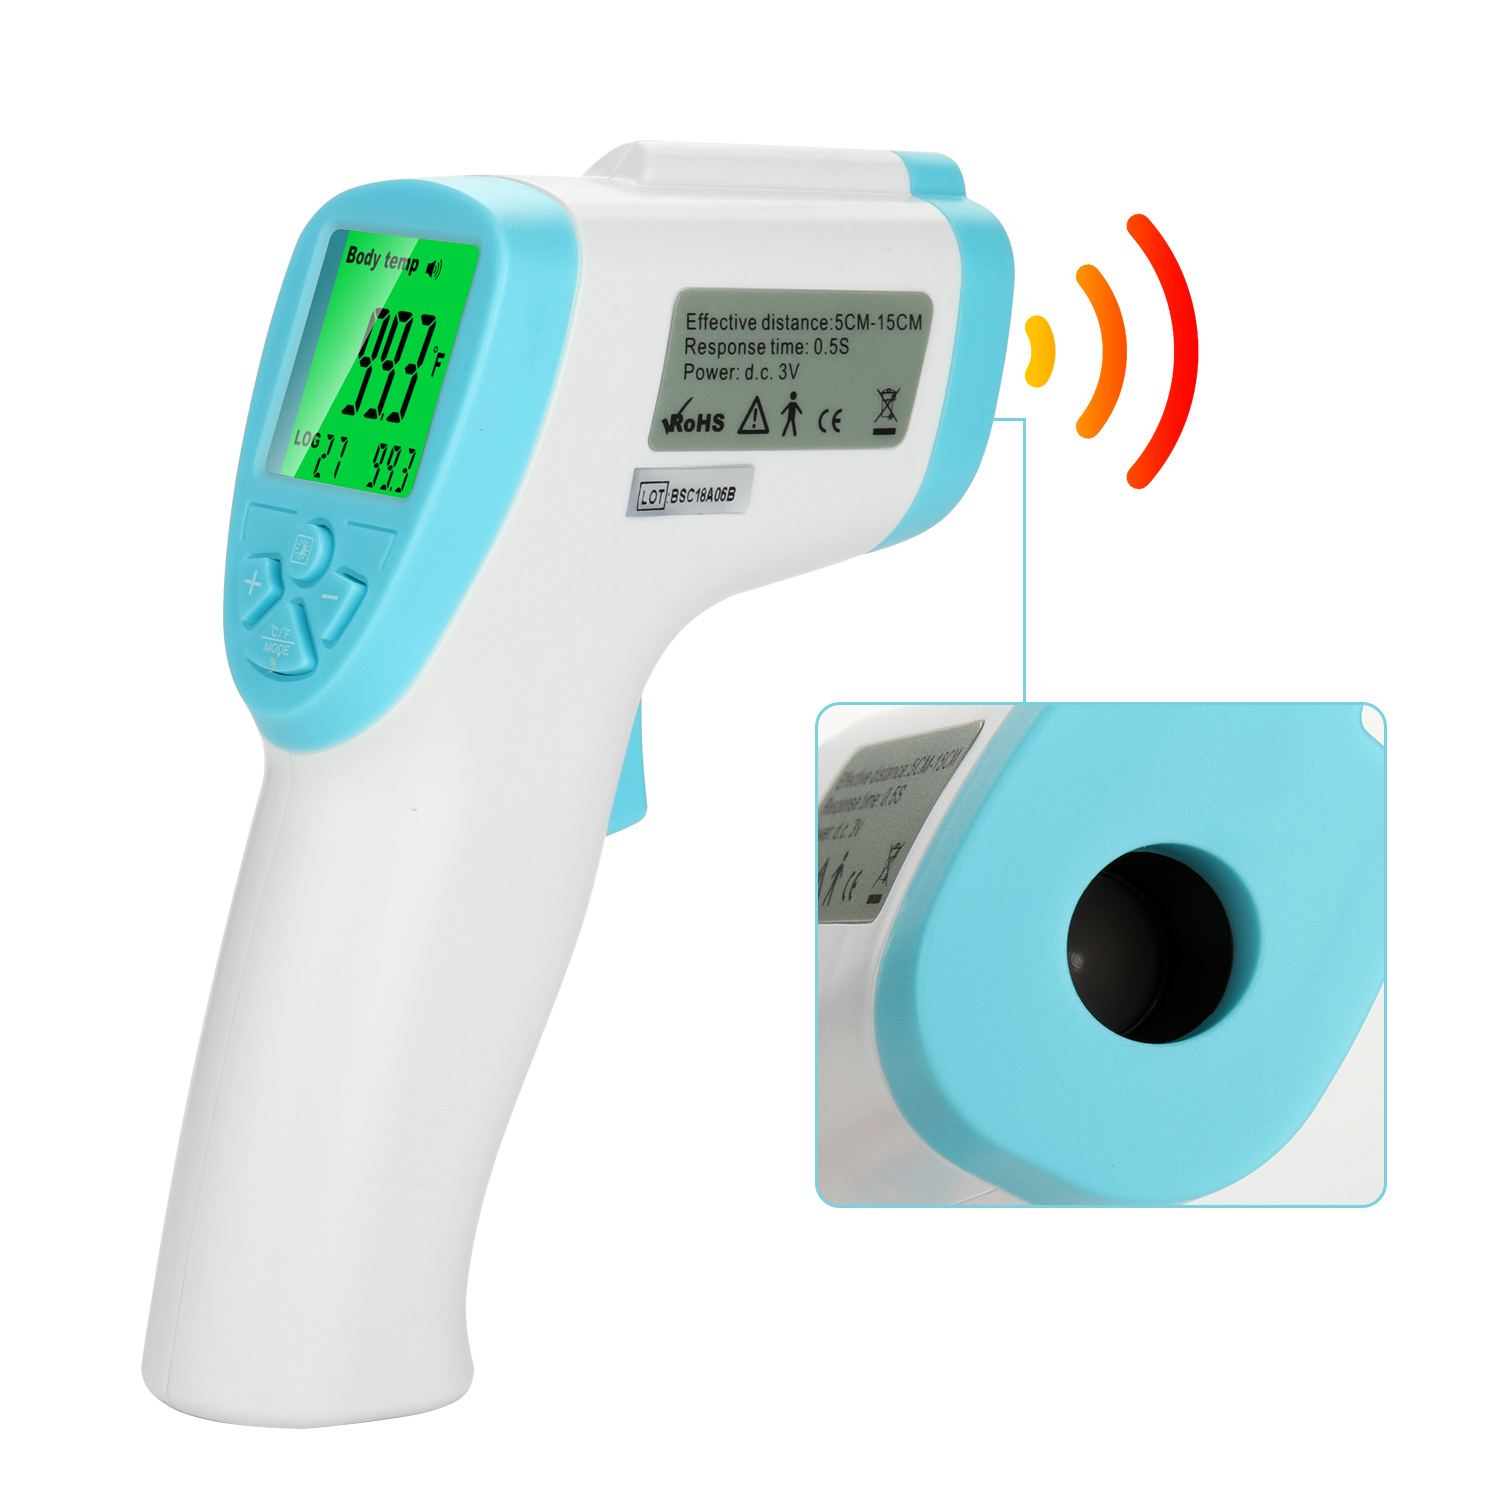 No Touch Forehead Thermometer Infrared IR Baby Body Skin Fever Temporal Measurement